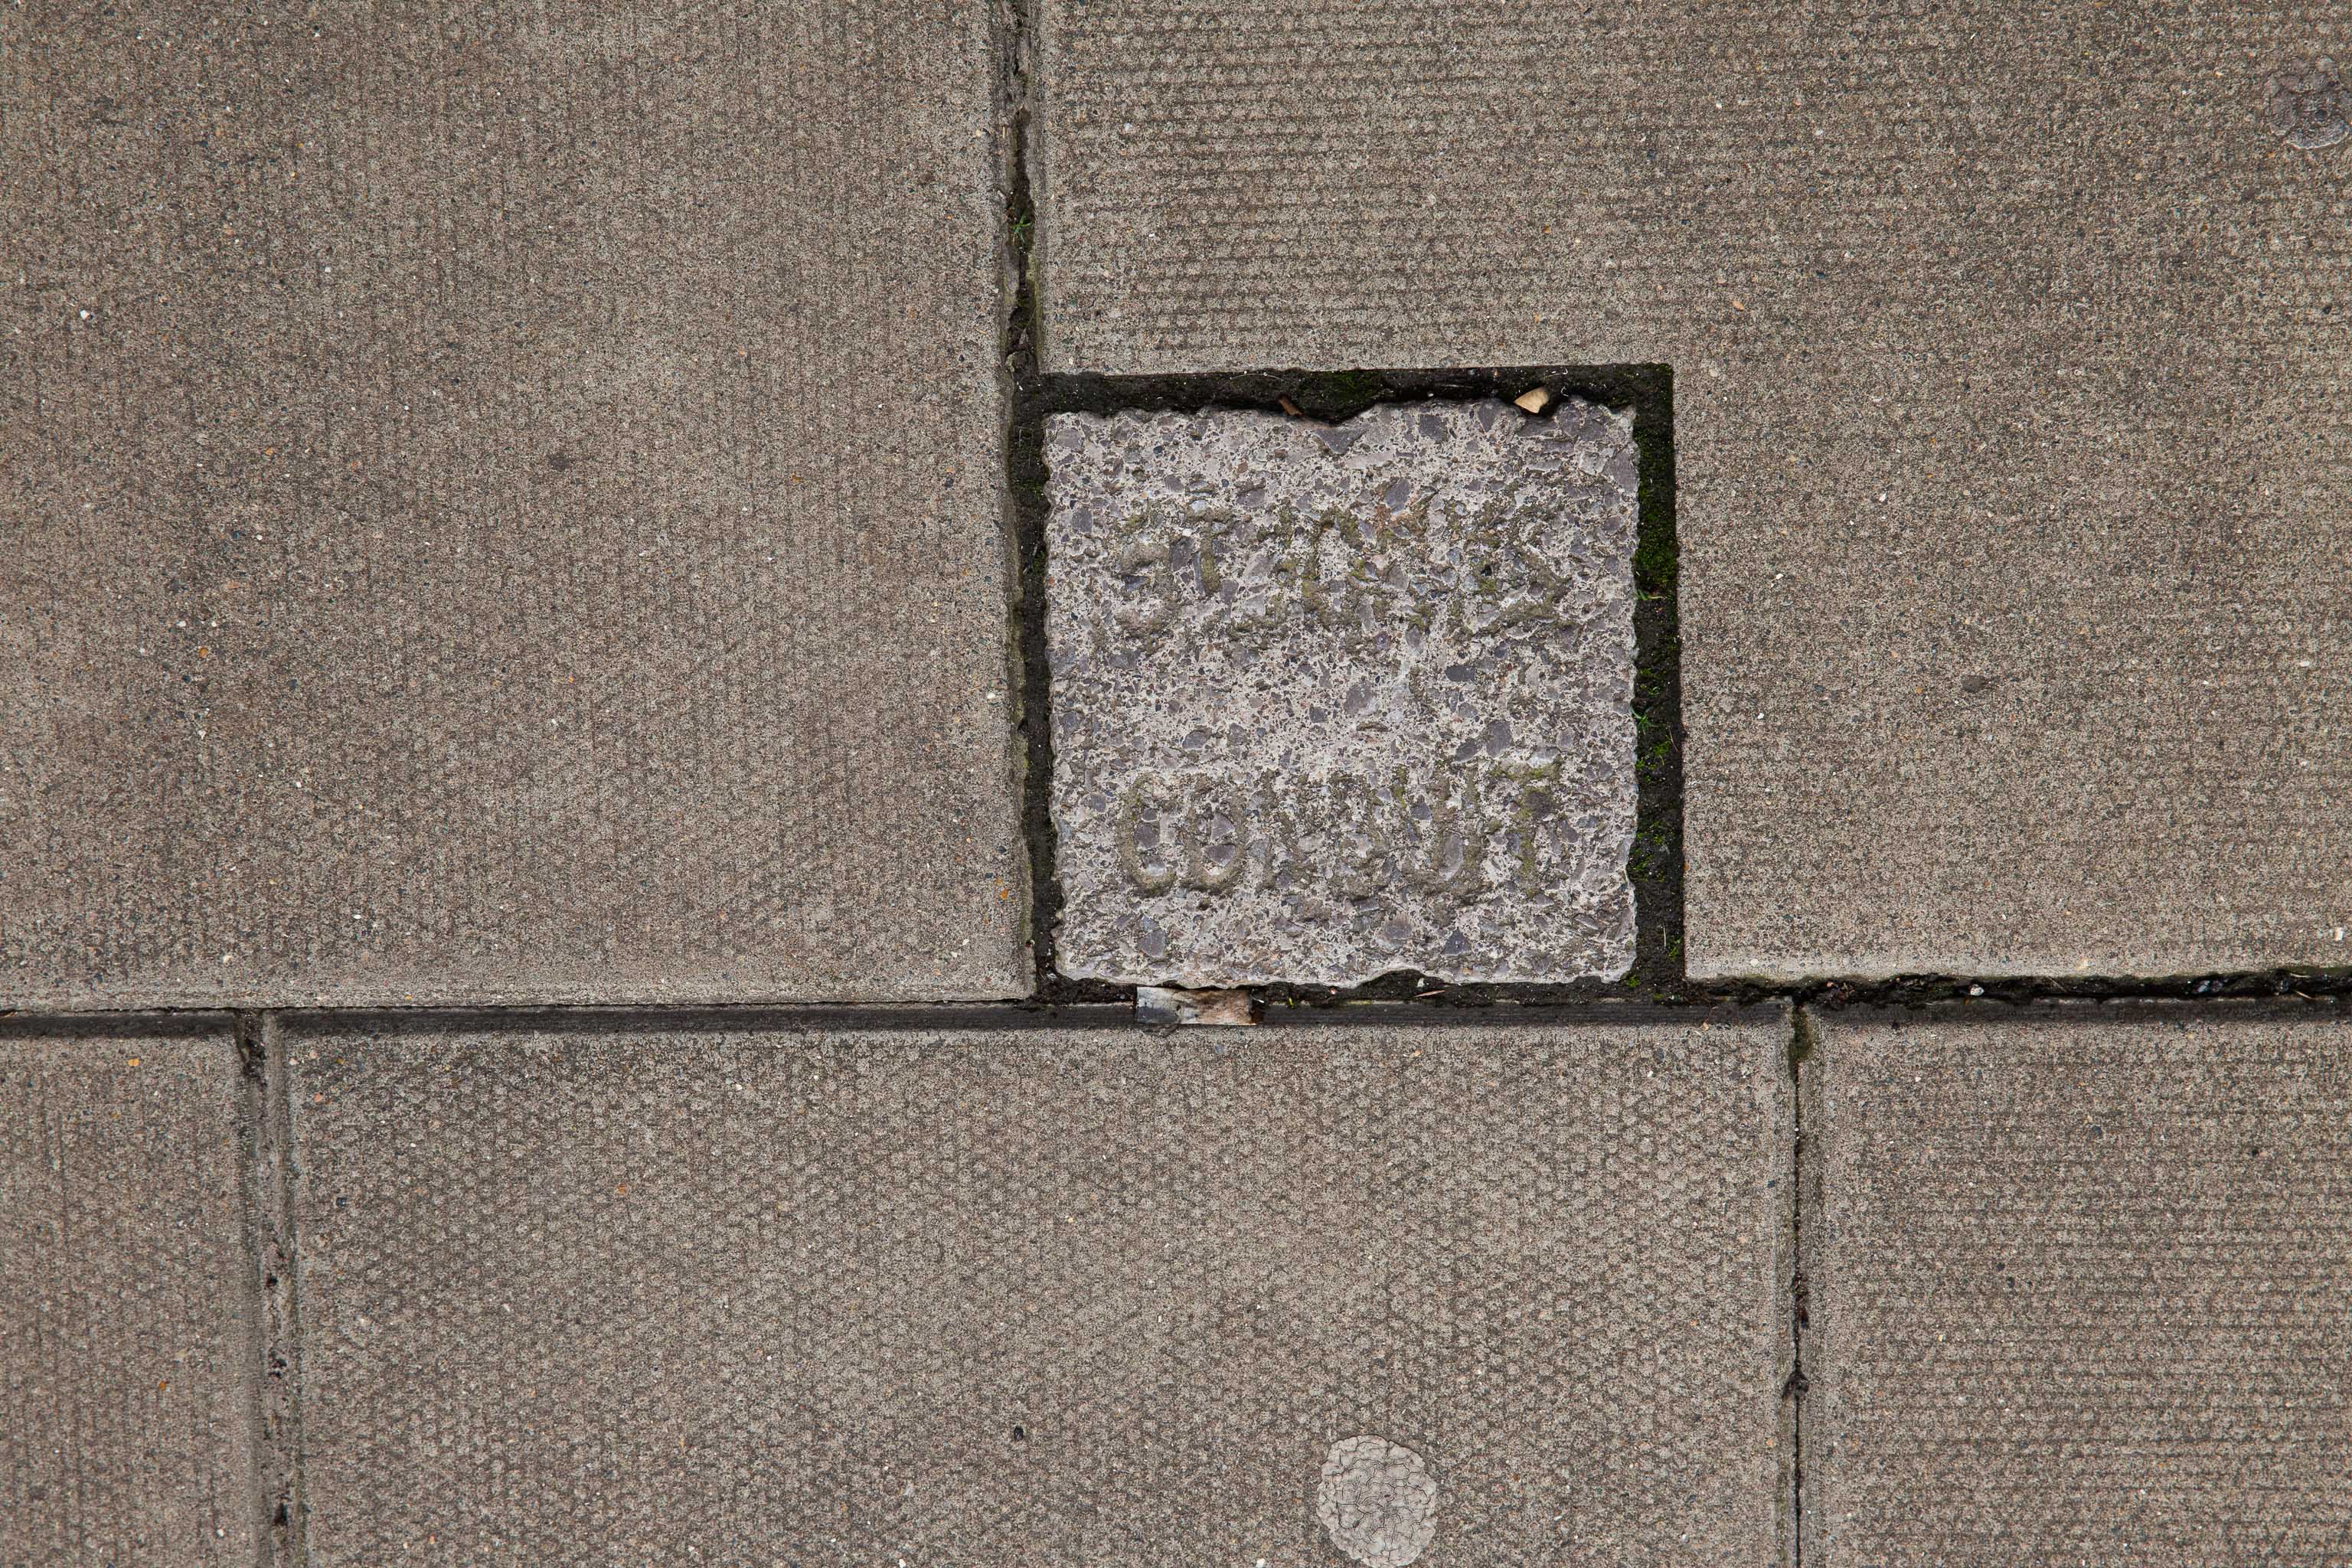 St John's Conduit
Believe it or not, this little pavement marker says "St John's Conduit" and marks the still-functional Carmelite water pipe that was built in 1267...